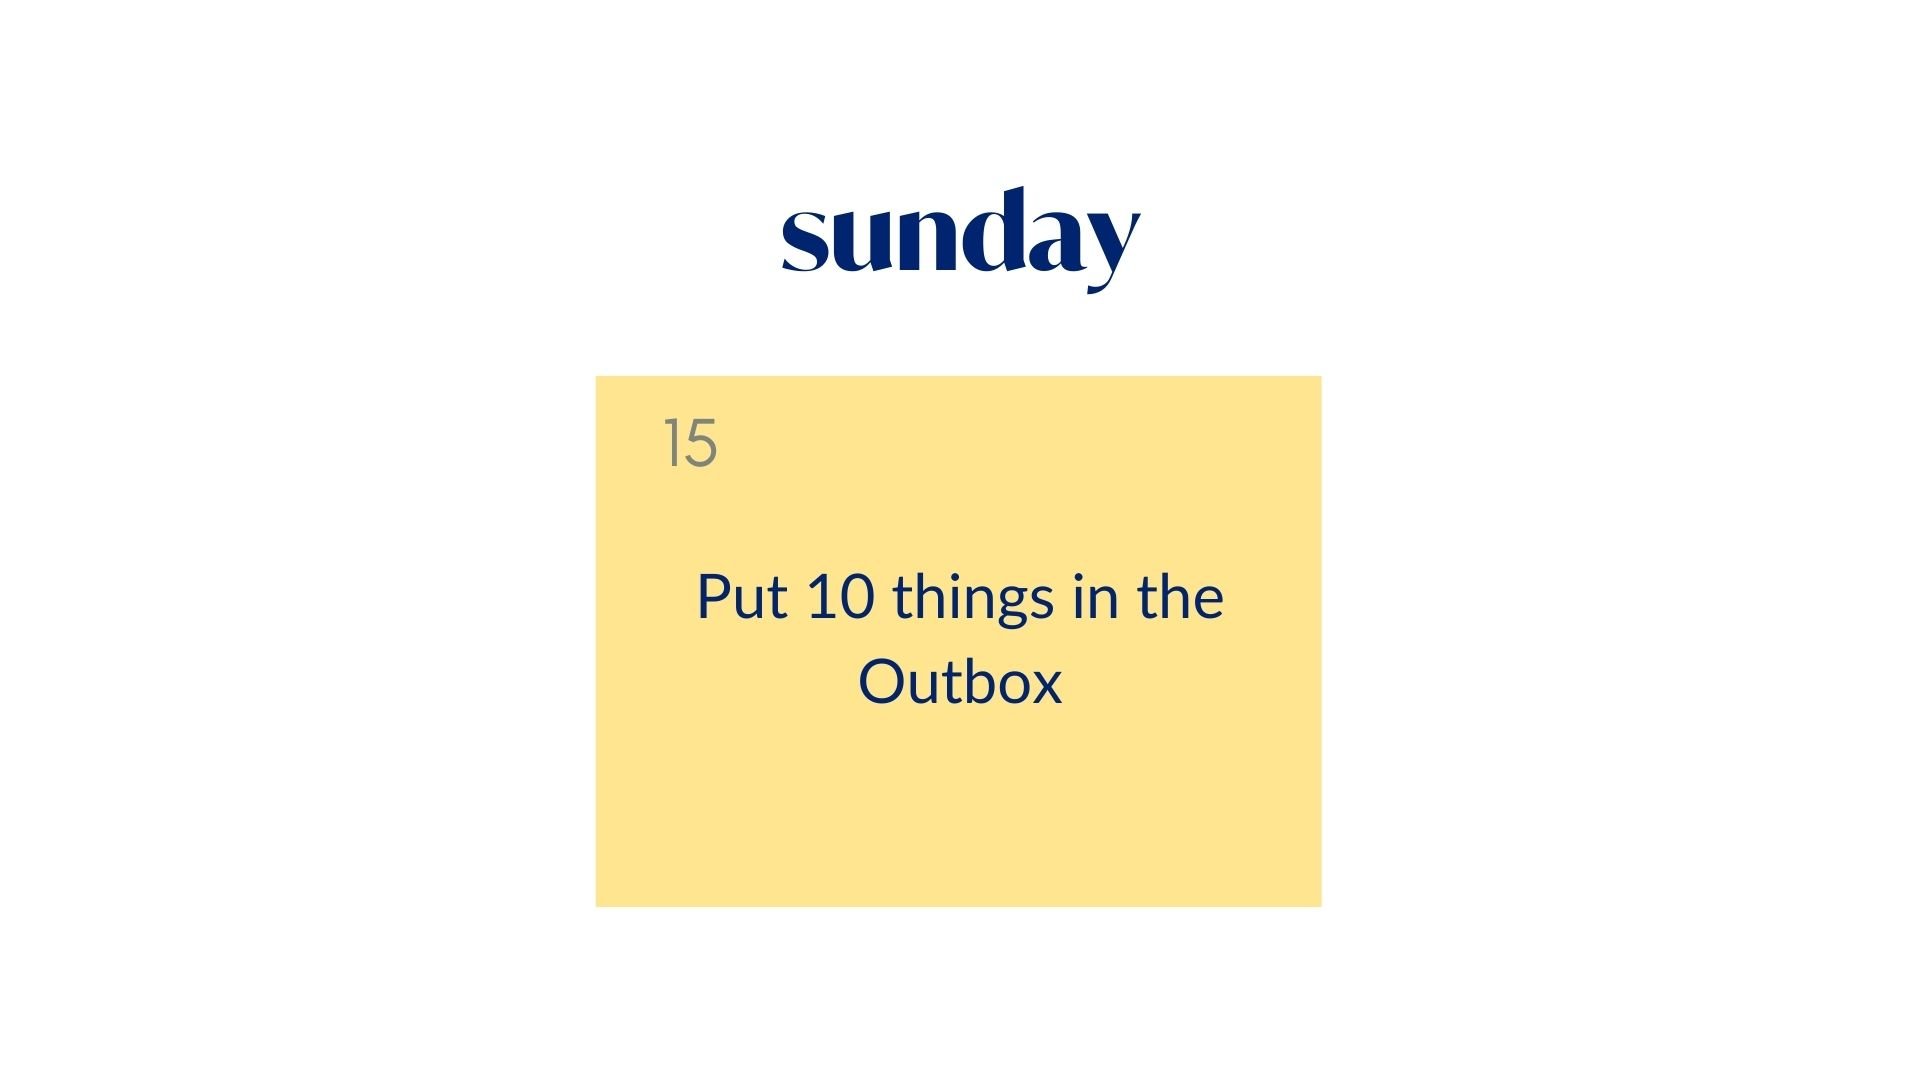 Day 15: Put 10 things in the Outbox